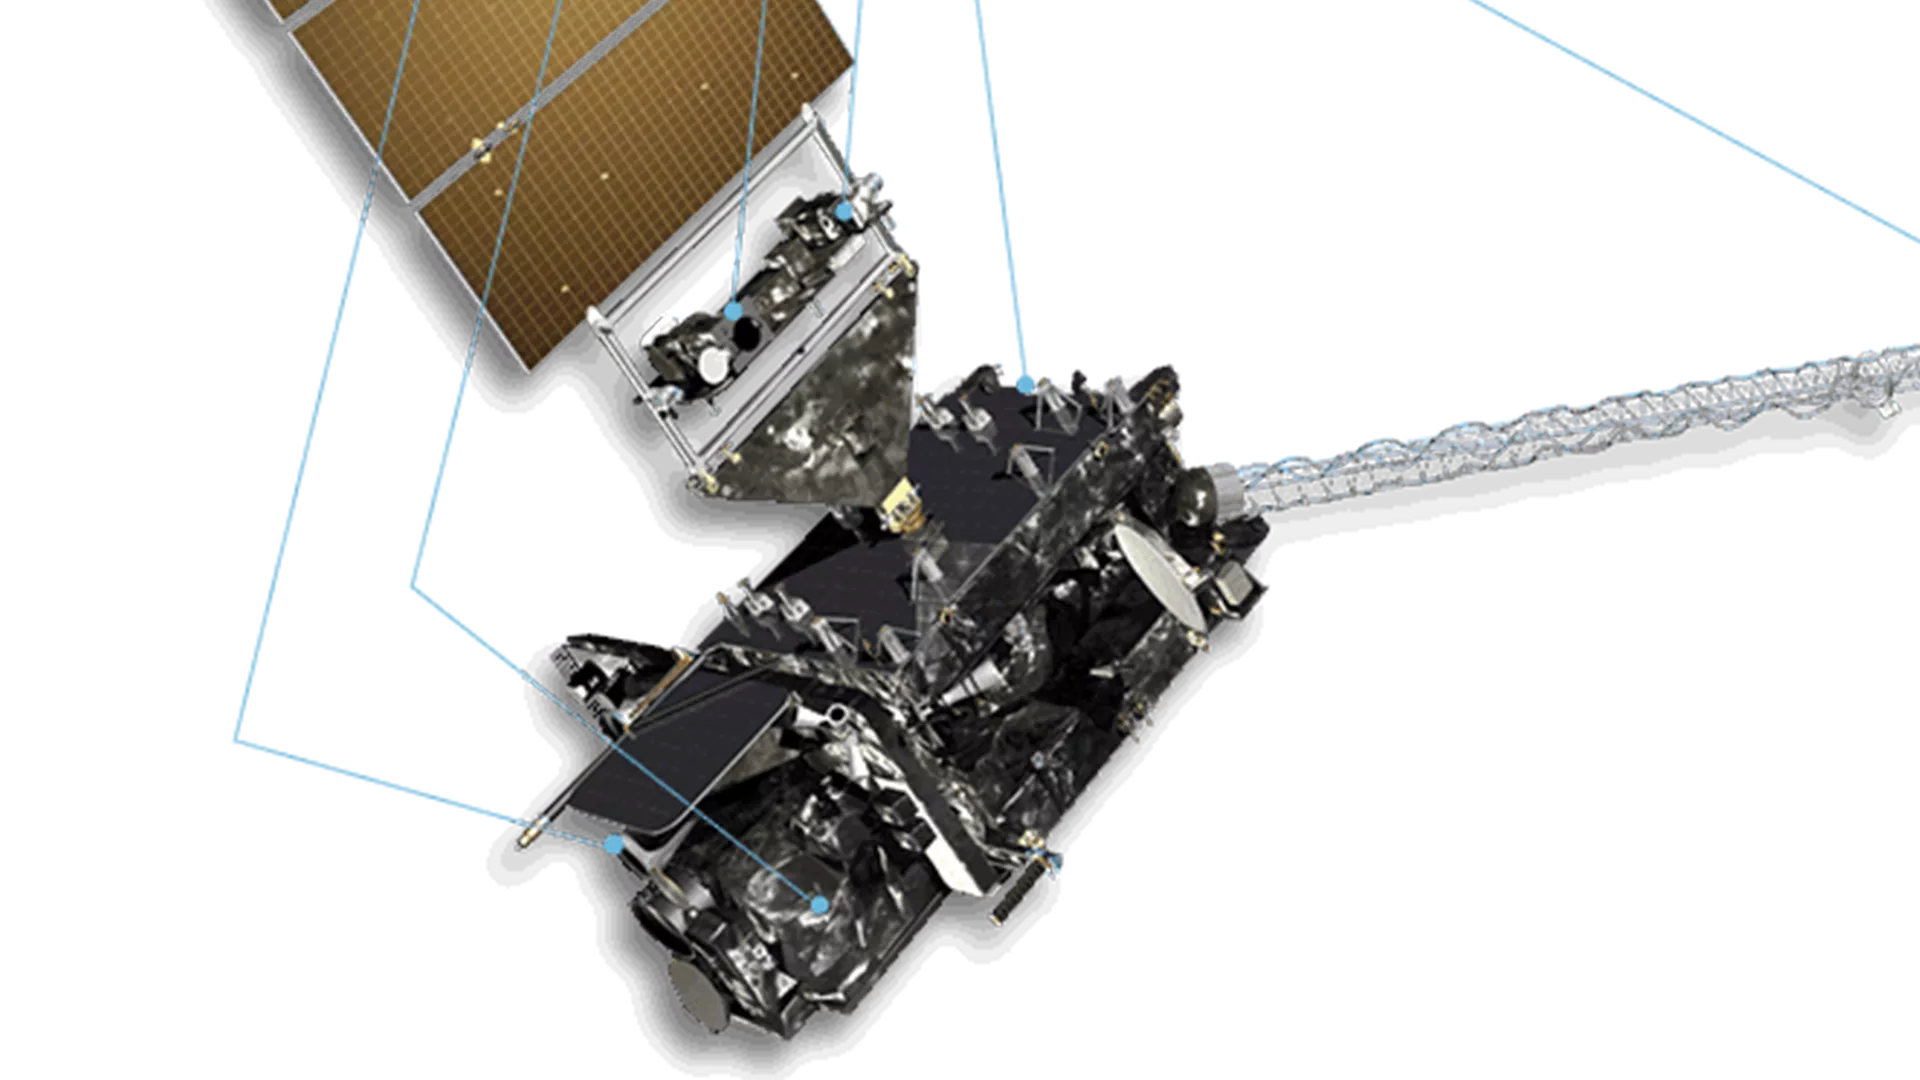 Image of GOES-R